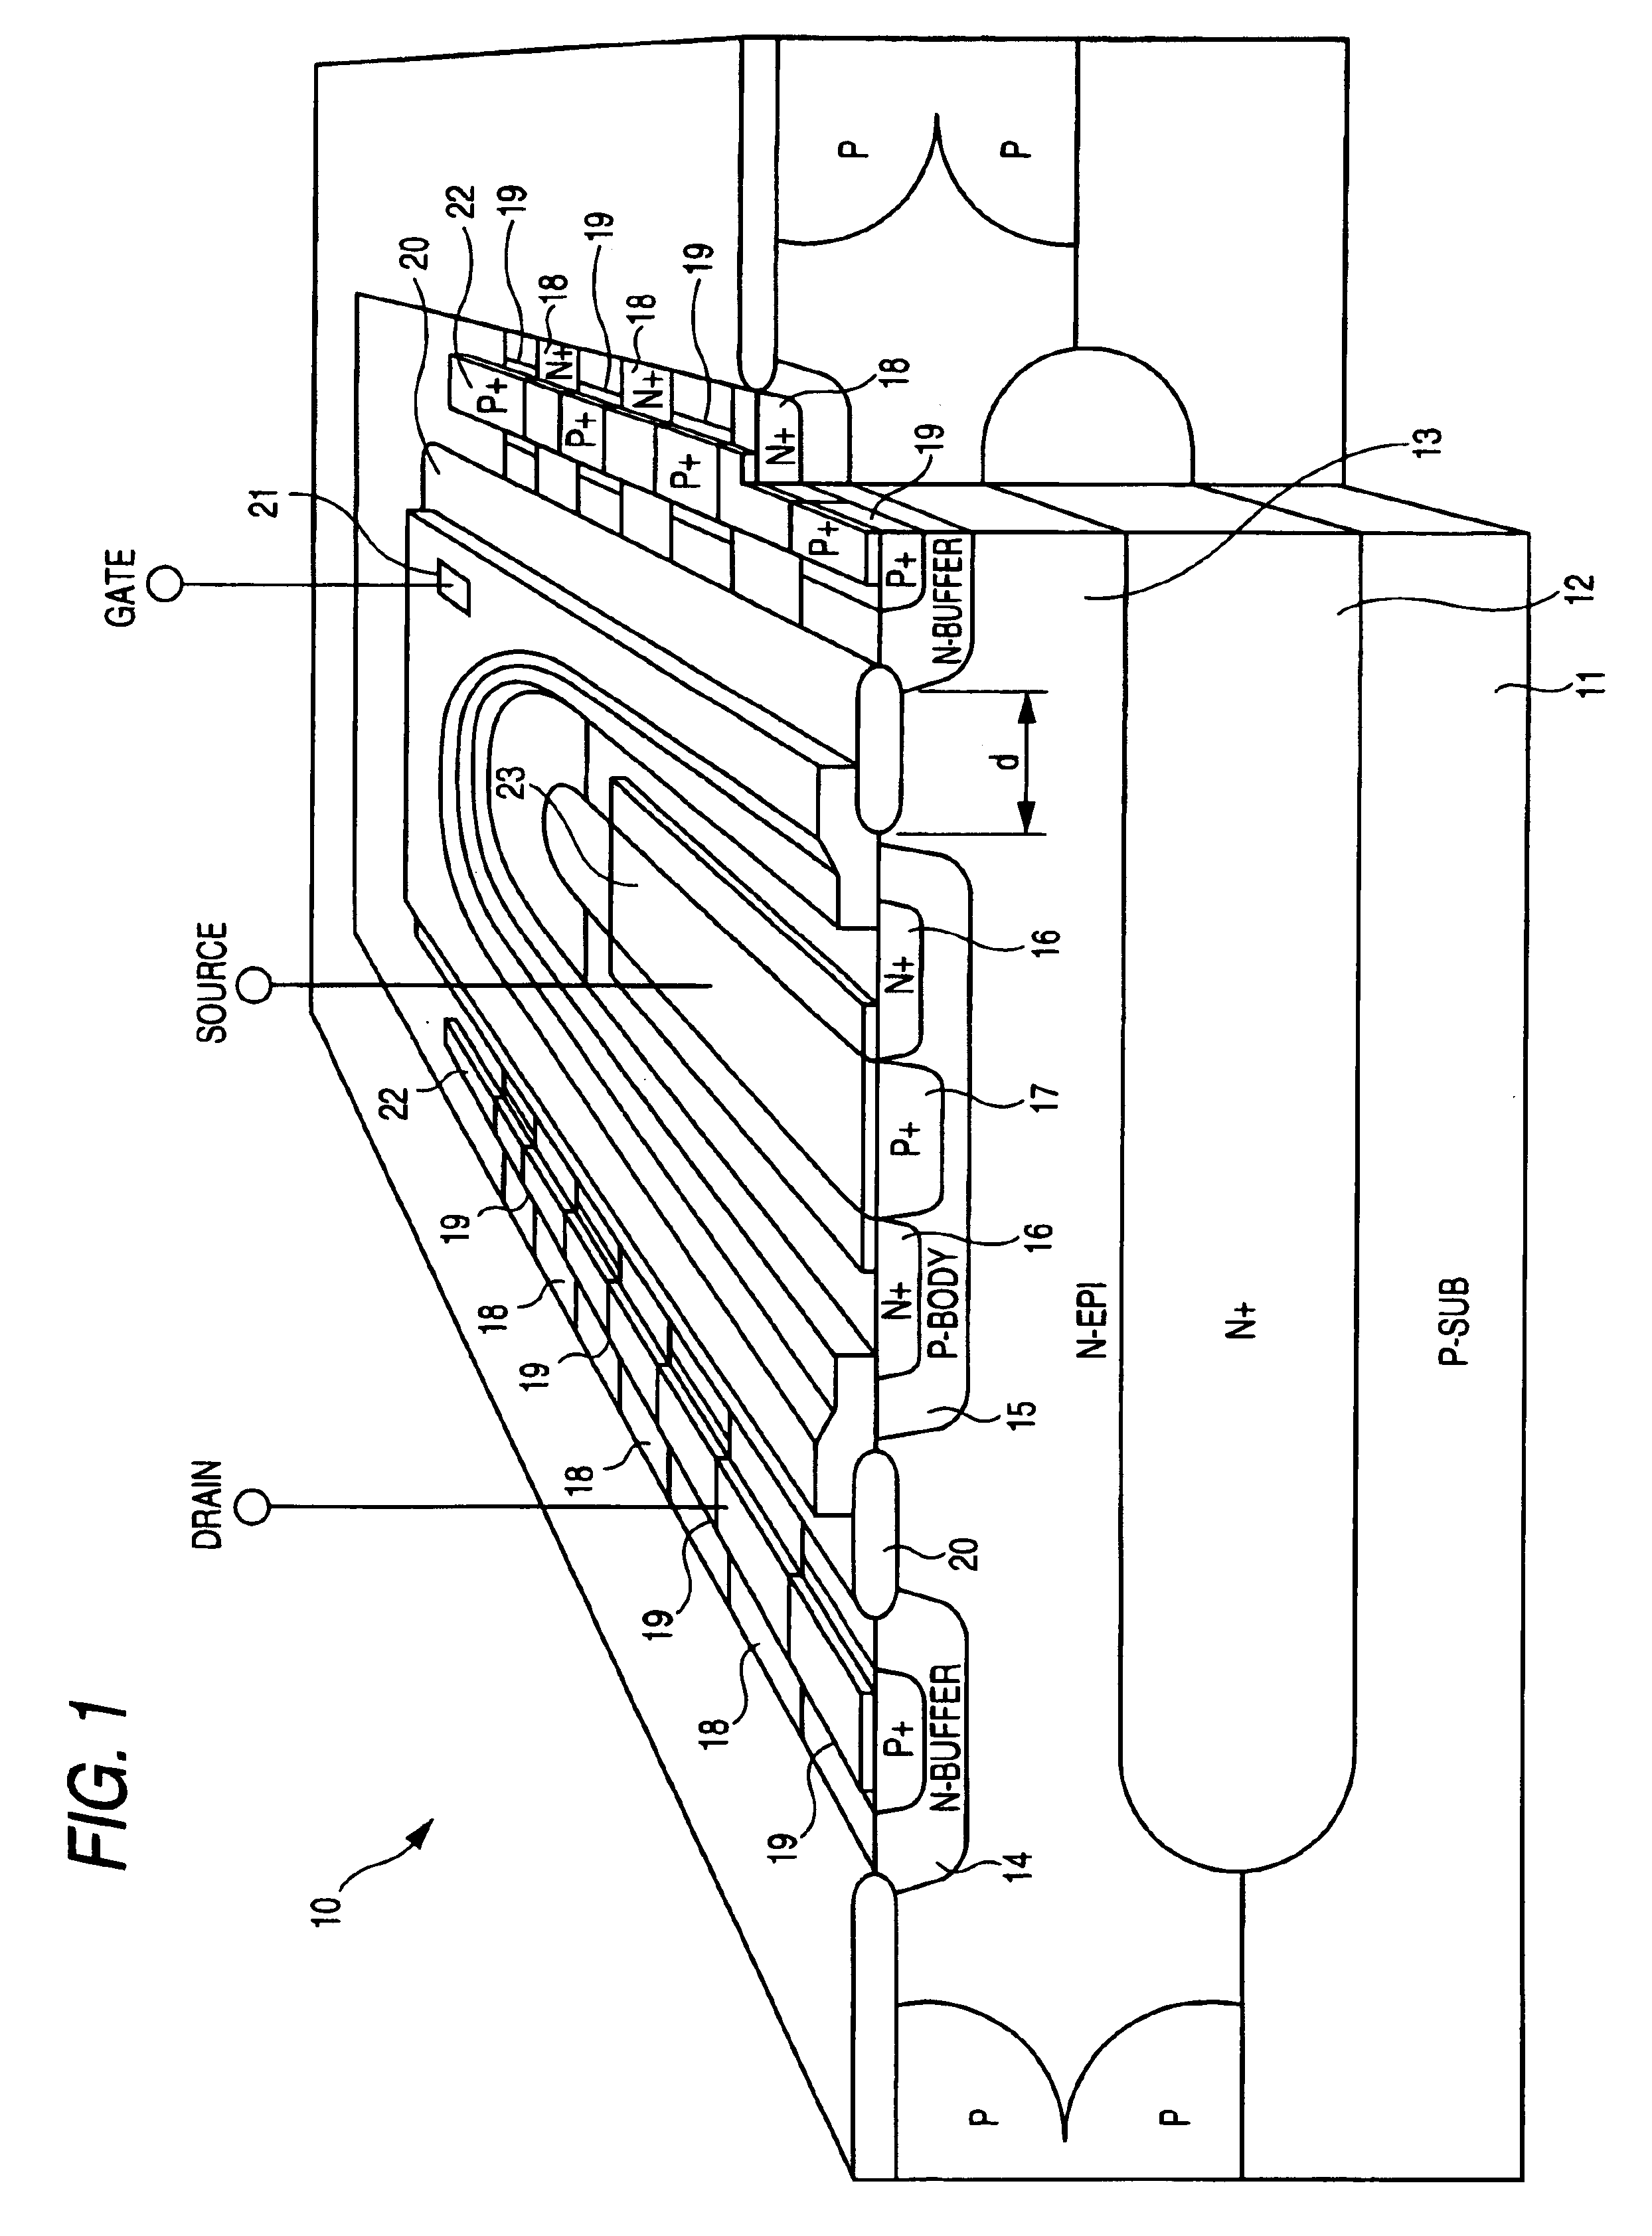 Double diffusion MOSFET with N+ and P+ type regions at an equal potential